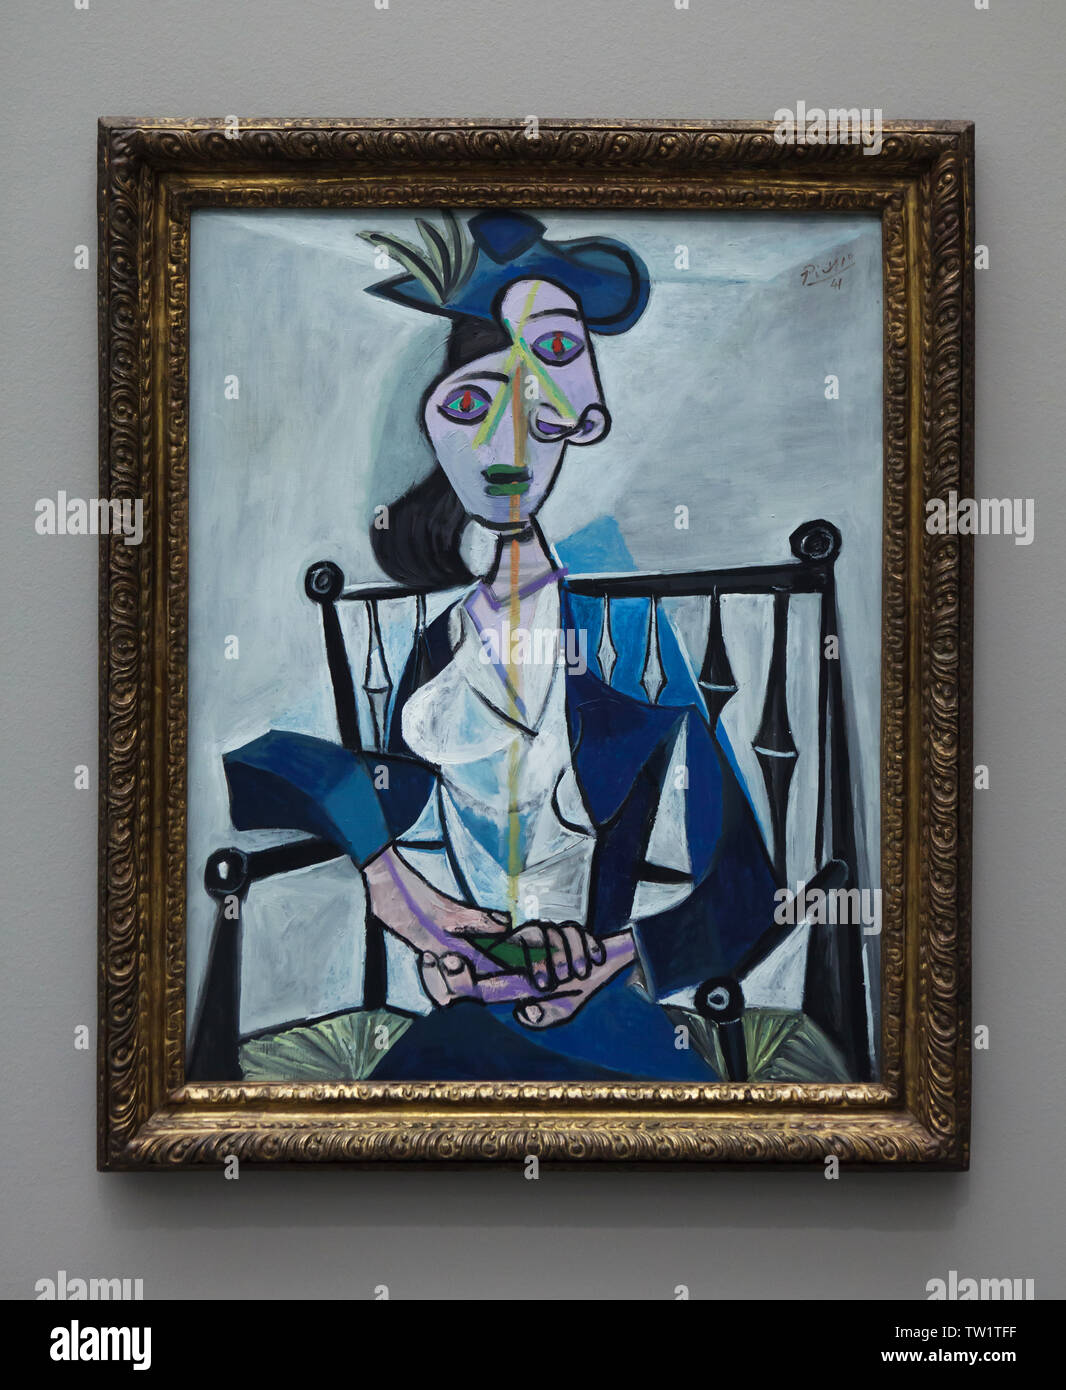 Painting 'Seated Woman' ('Dora Maar') by Pablo Picasso (1941) on display in the Pinakothek der Moderne in Munich, Bavaria, Germany. Stock Photo